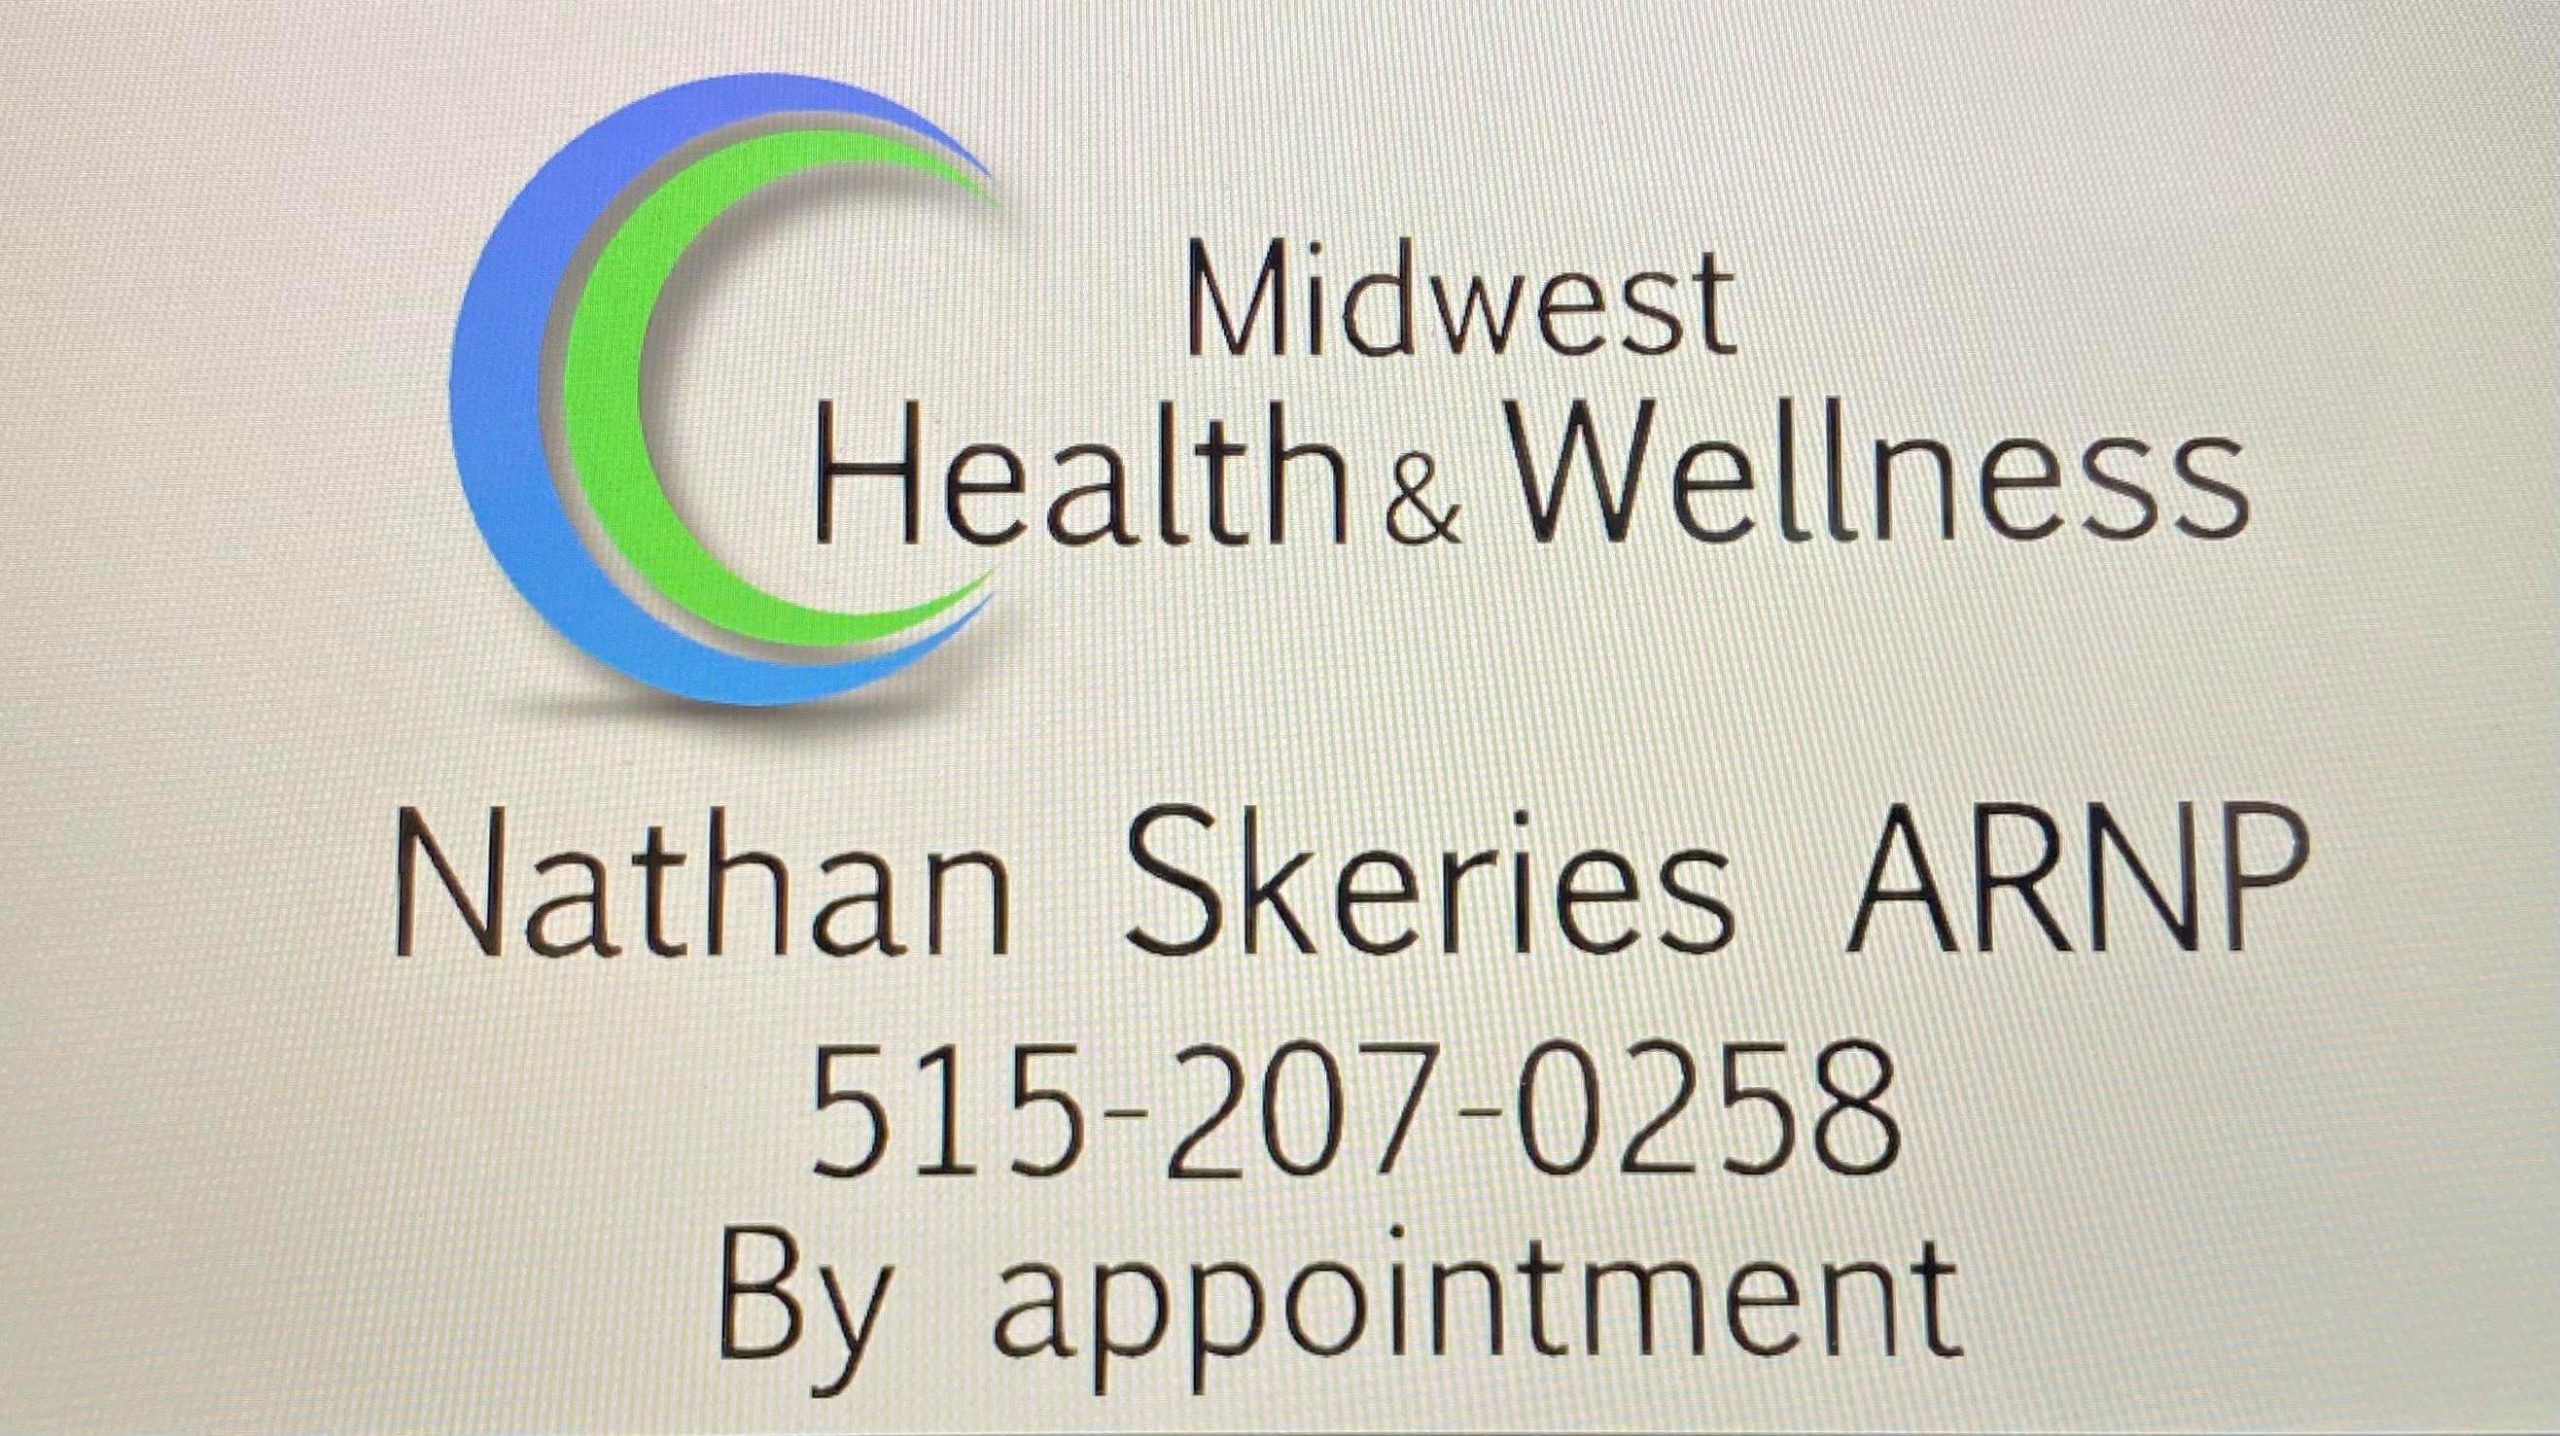 Des Moines Firefighters Midwest Health and Wellness